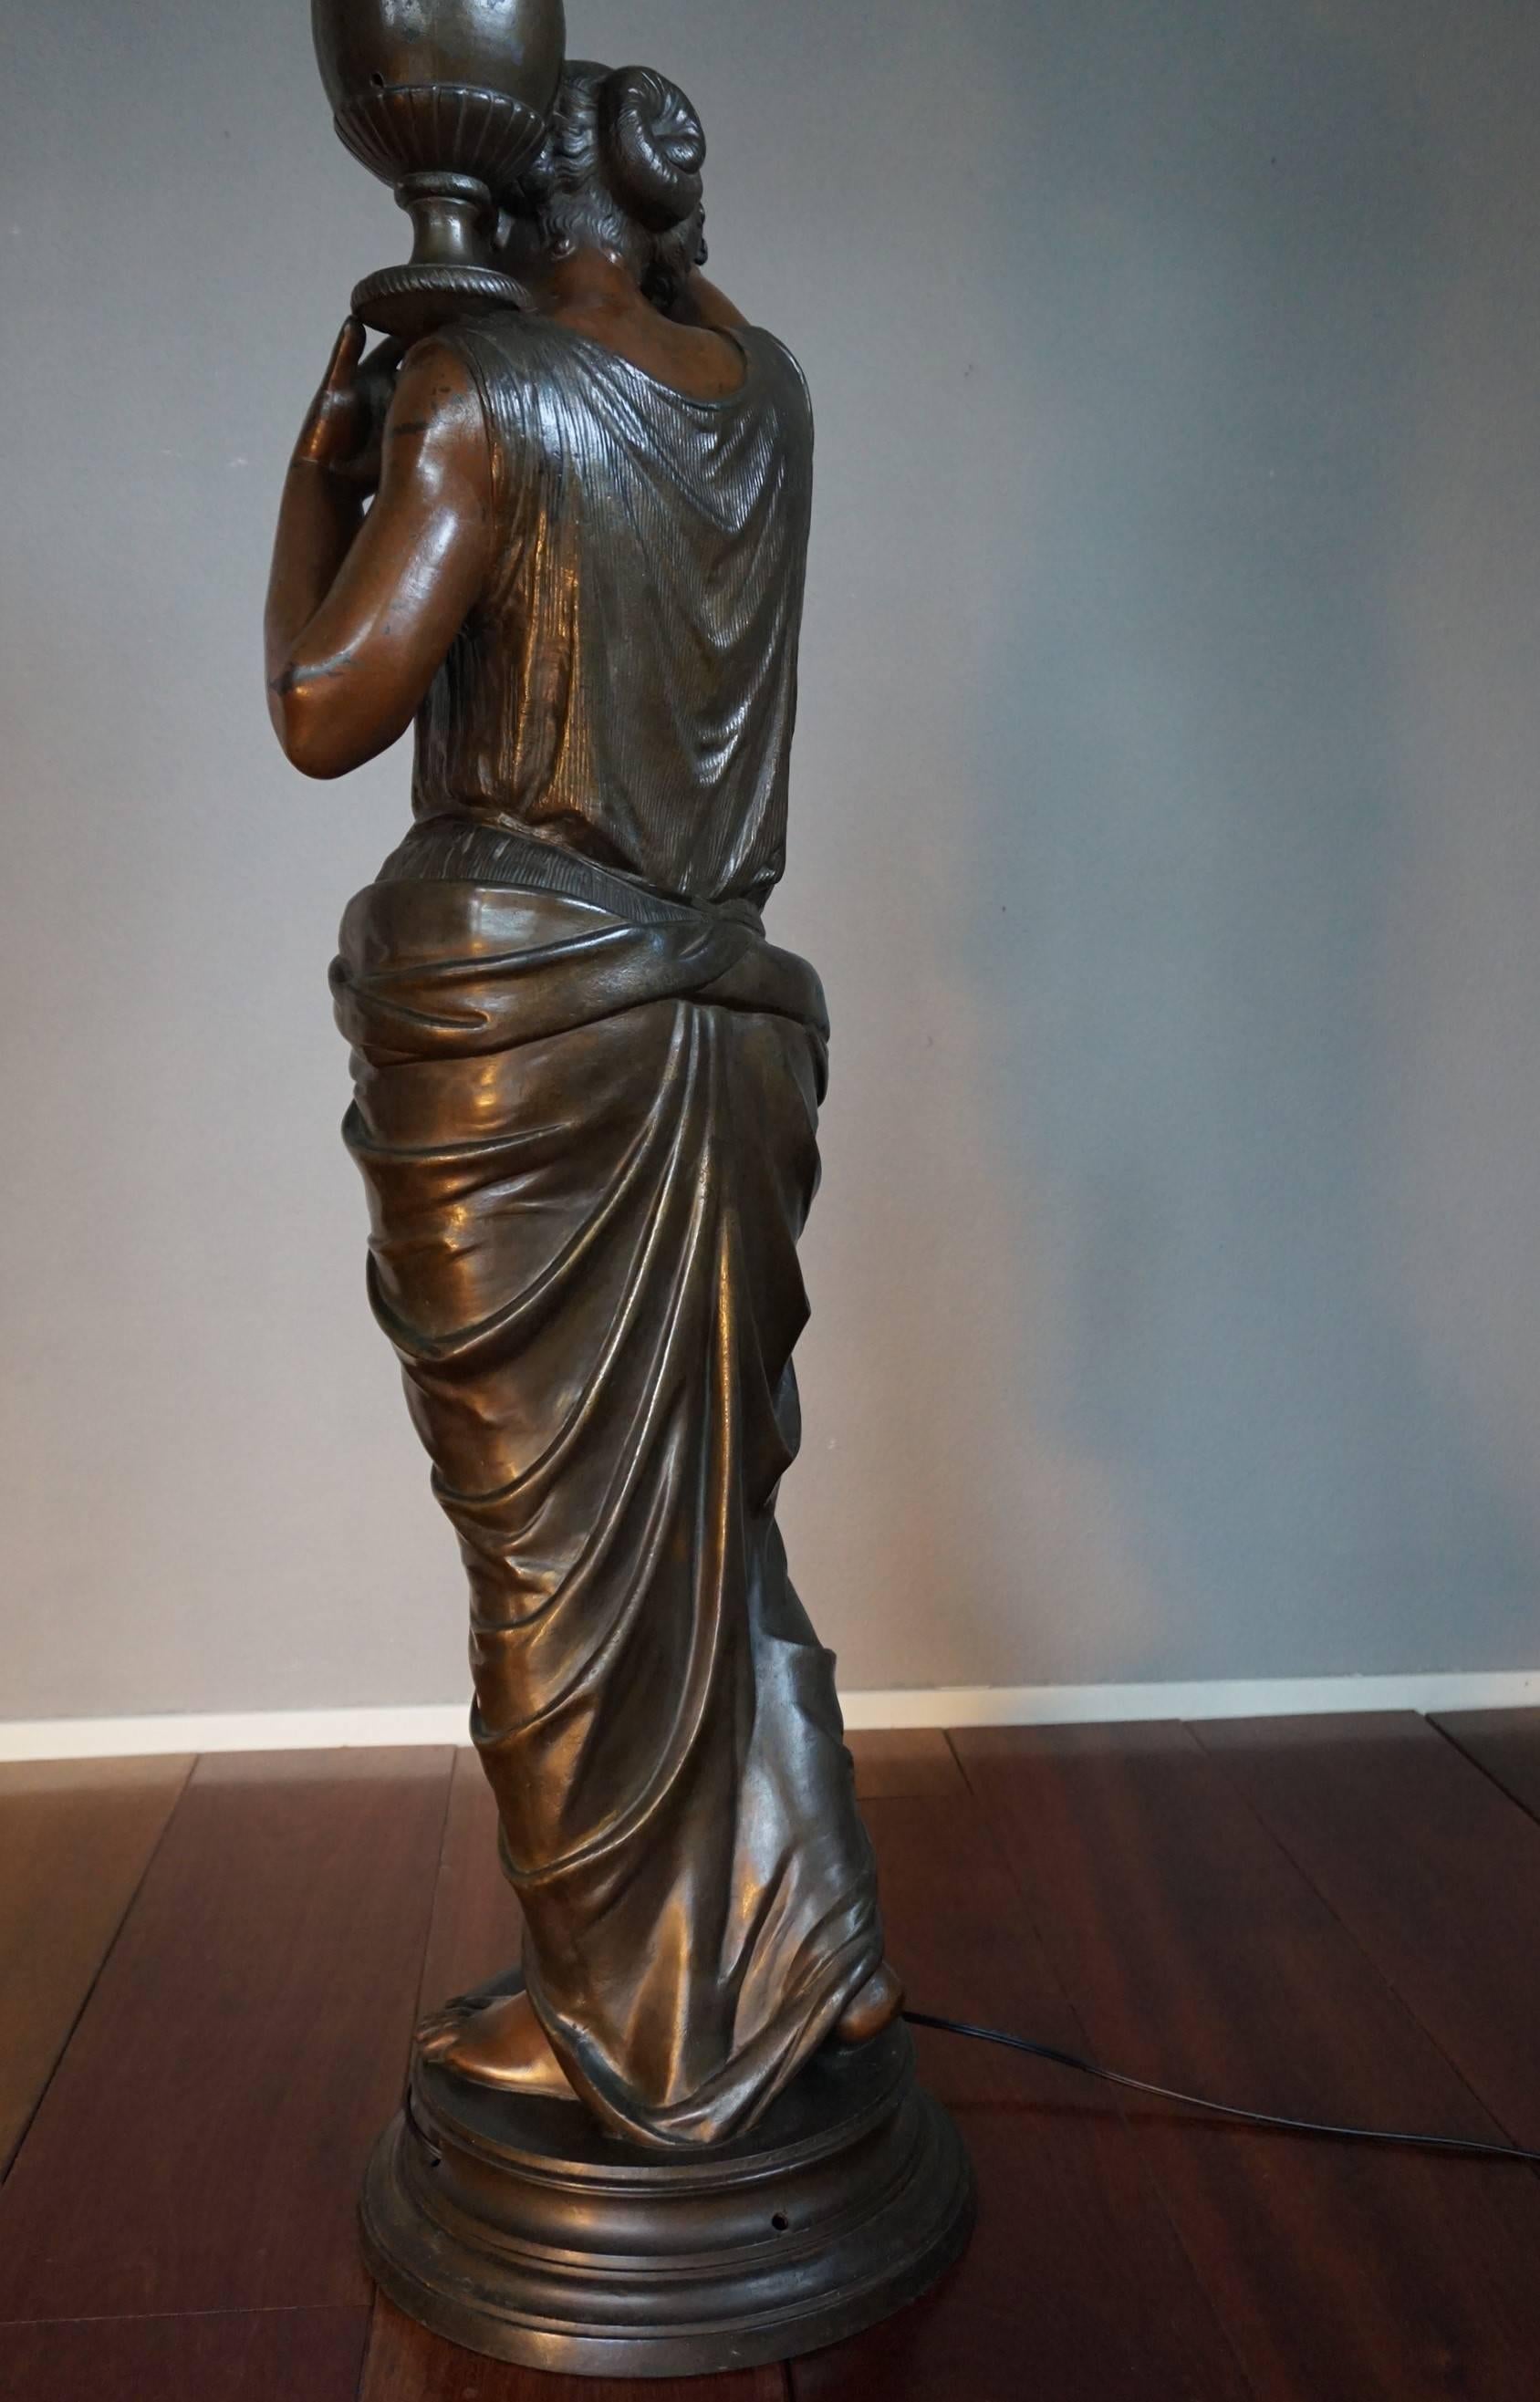 Dutch Art Nouveau Era, Bronzed and Marked 4 Feet Floor Lamp of Dione Goddess of Water